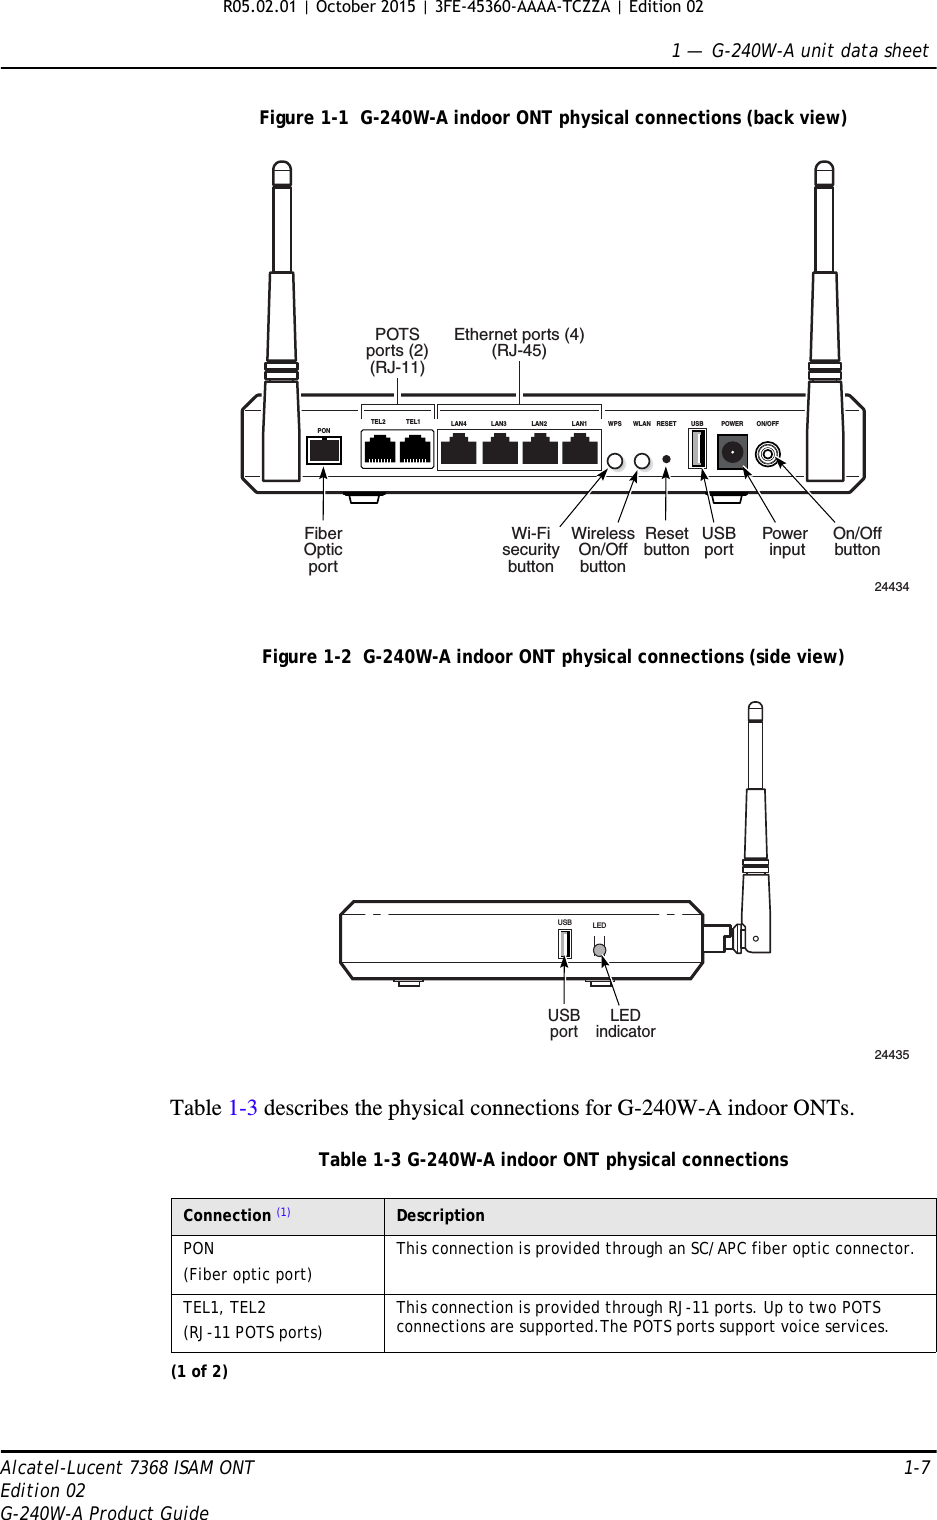 1 —  G-240W-A unit data sheetAlcatel-Lucent 7368 ISAM ONT 1-7Edition 02G-240W-A Product GuideFigure 1-1  G-240W-A indoor ONT physical connections (back view)Figure 1-2  G-240W-A indoor ONT physical connections (side view)Table 1-3 describes the physical connections for G-240W-A indoor ONTs.Table 1-3 G-240W-A indoor ONT physical connectionsConnection (1) DescriptionPON (Fiber optic port)This connection is provided through an SC/APC fiber optic connector. TEL1, TEL2(RJ-11 POTS ports)This connection is provided through RJ-11 ports. Up to two POTS connections are supported.The POTS ports support voice services. (1 of 2)LAN4PONLAN3 LAN2 LAN1 WPS WLAN RESET USB POWER ON/OFFTEL2 TEL1Ethernet ports (4)(RJ-45)POTSports (2)(RJ-11)USBportResetbuttonWirelessOn/OffbuttonWi-FisecuritybuttonFiberOpticport24434On/OffbuttonPower input24435LEDUSBLEDindicatorUSBport R05.02.01 | October 2015 | 3FE-45360-AAAA-TCZZA | Edition 02 